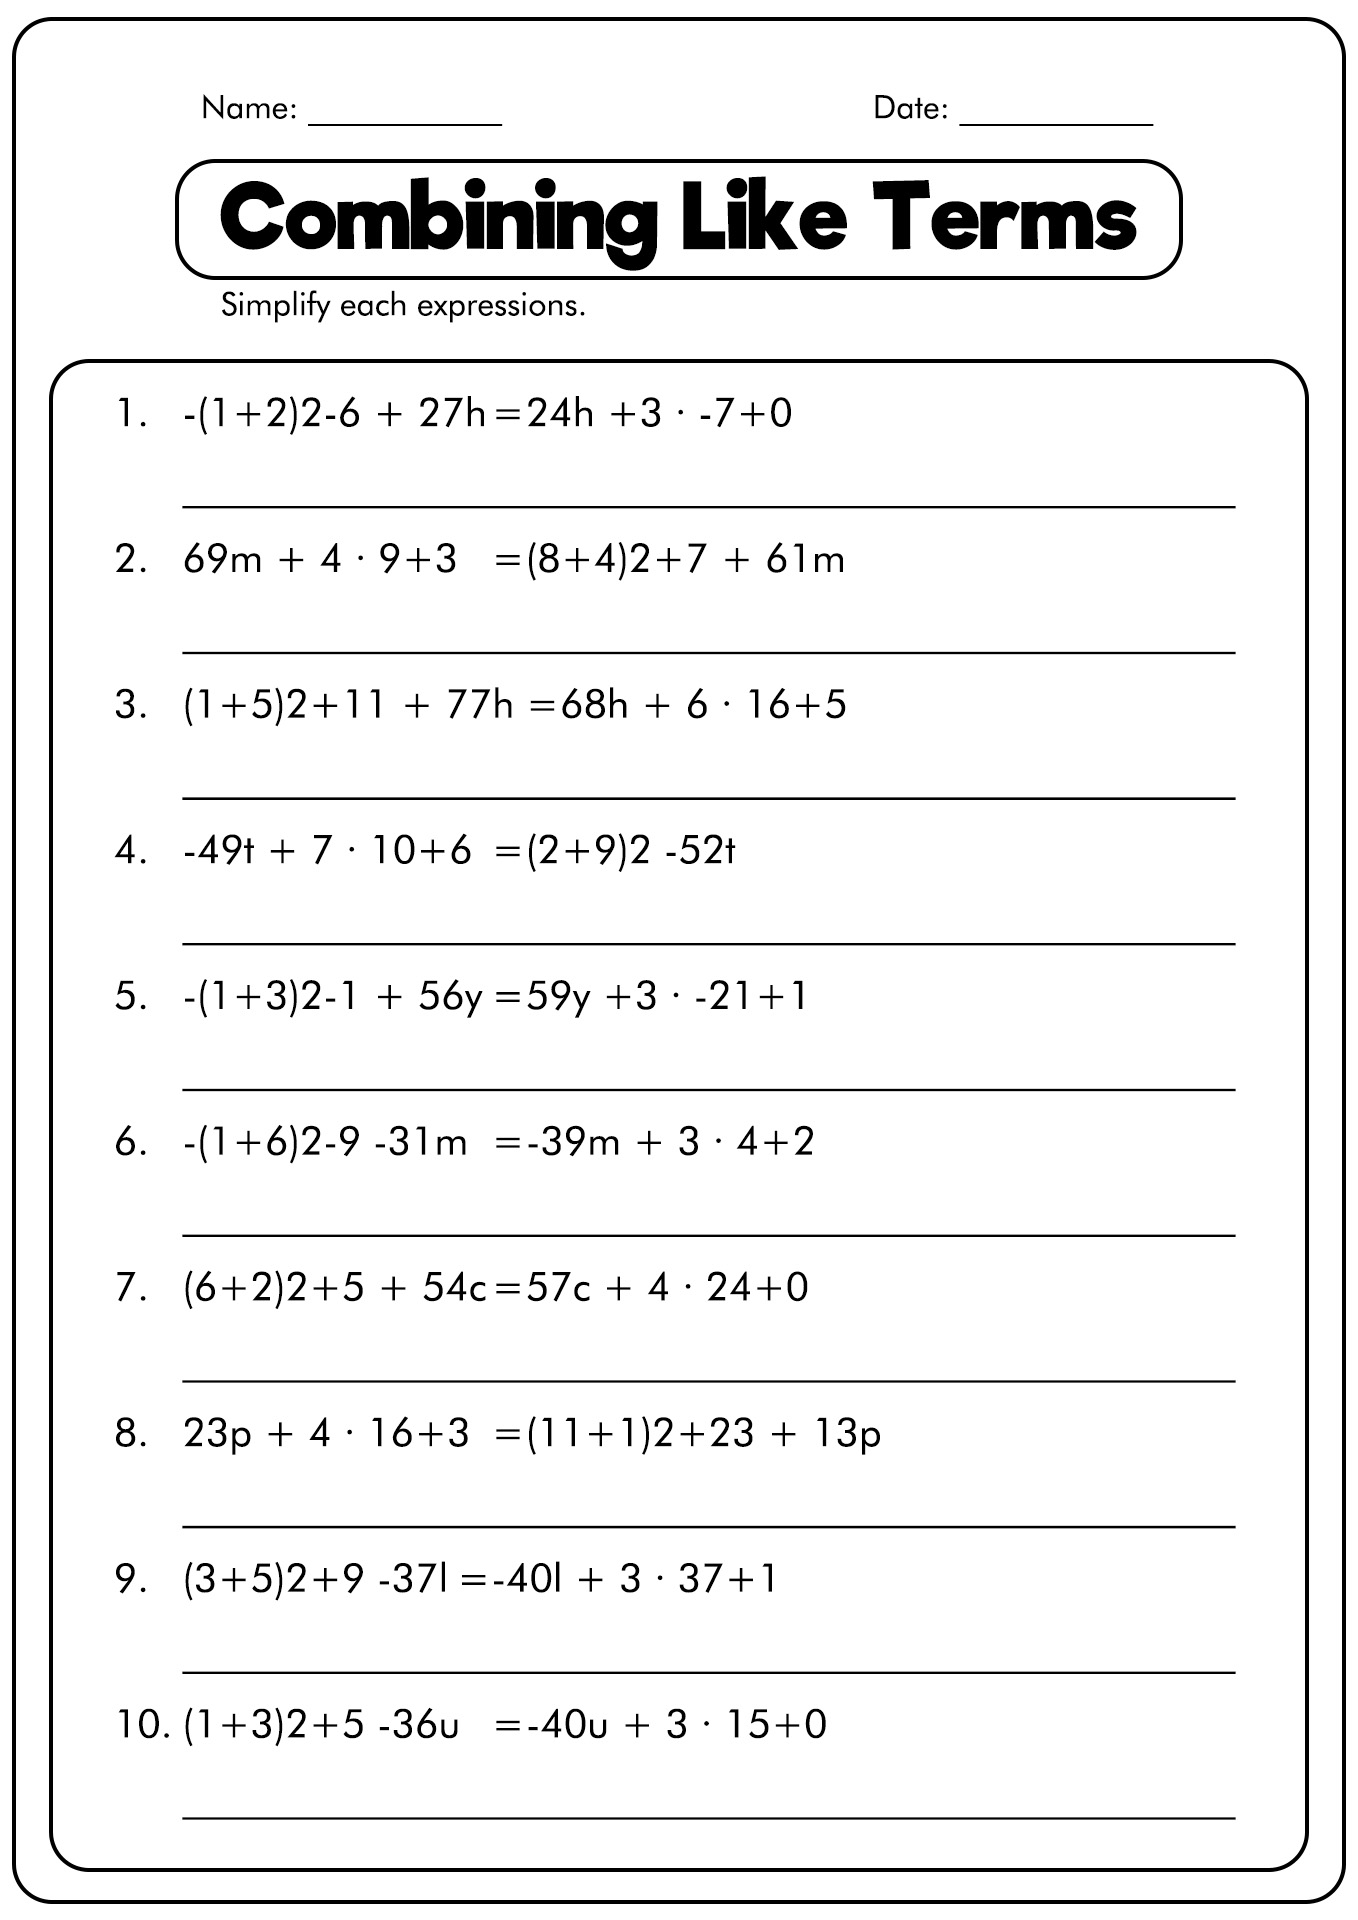 12 Best Images Of 6th Grade Combining Like Terms Worksheet Simplifying Expressions Worksheets 